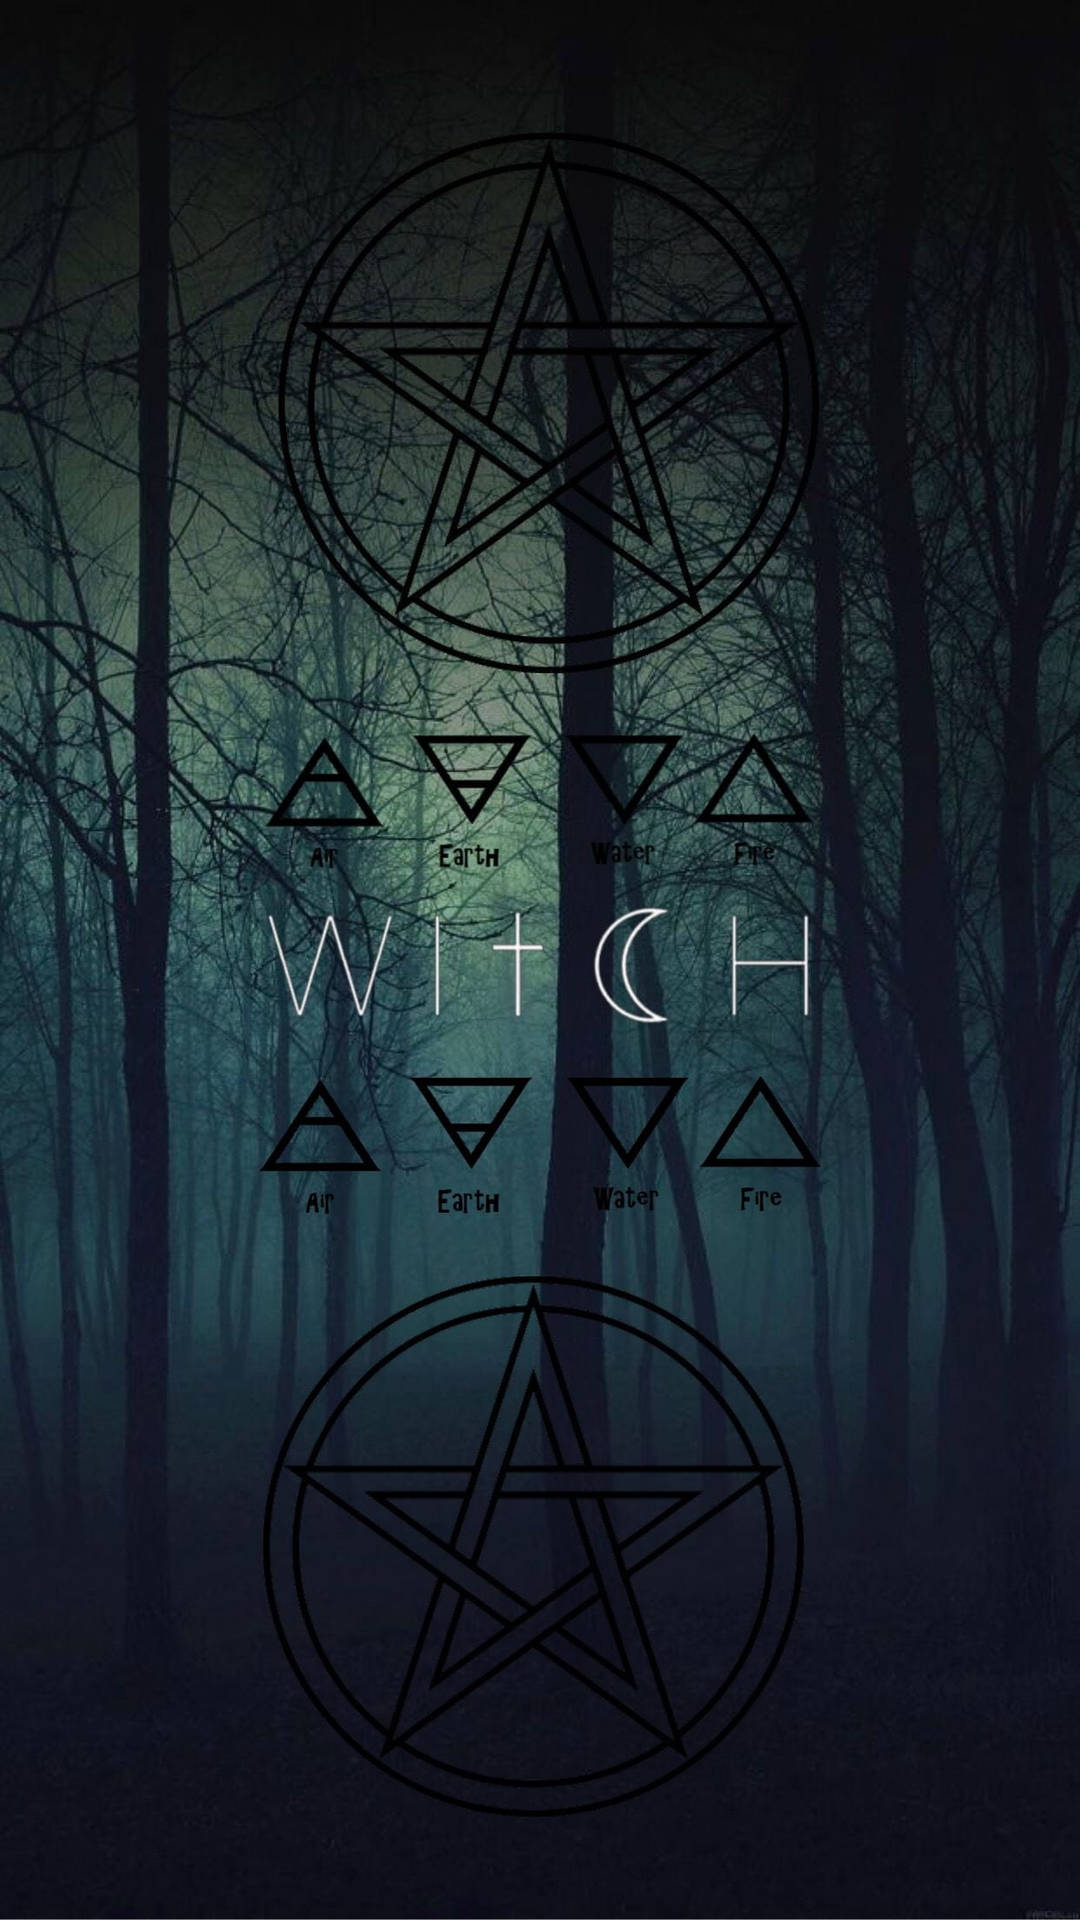 Witchy Dark Woods For Iphone Screens Wallpaper